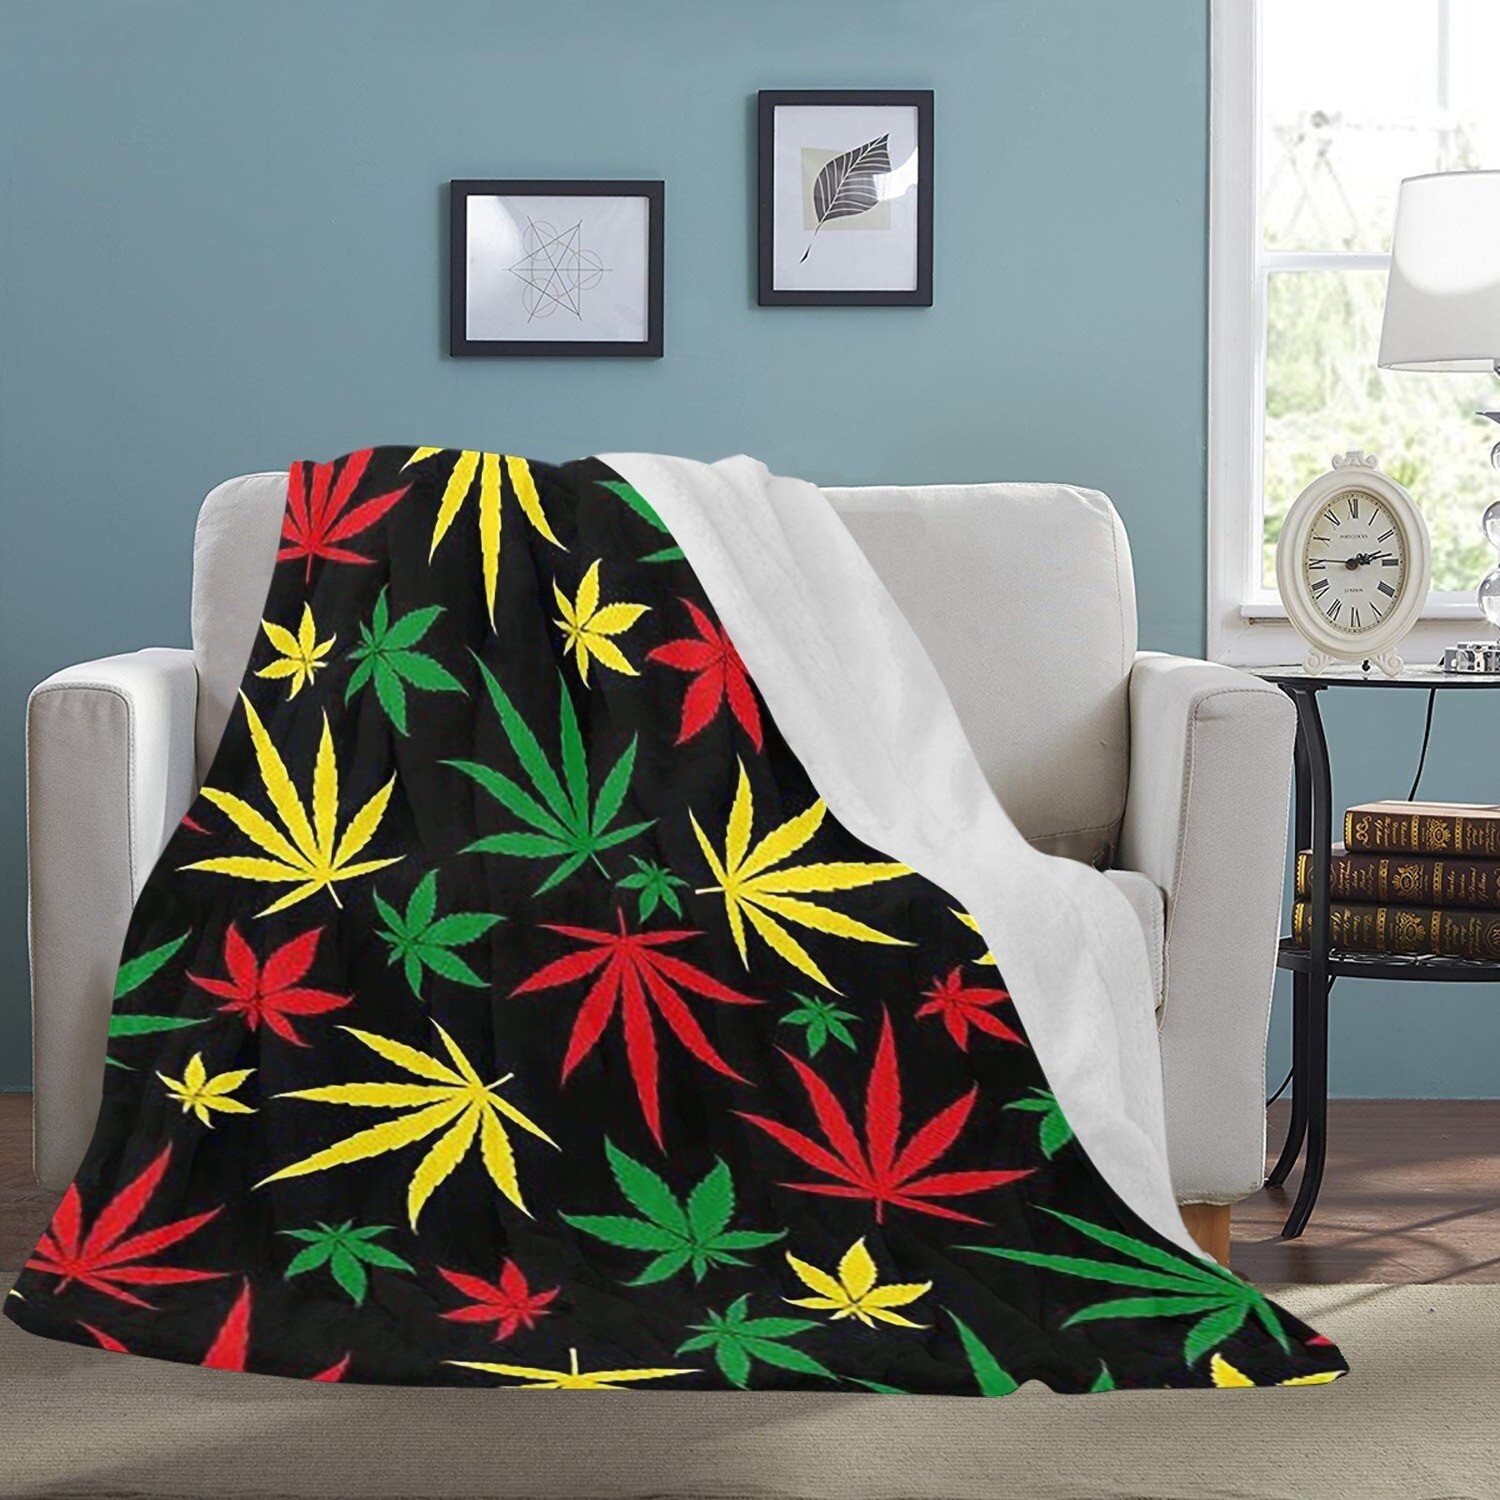 🤴🏽👸🏽Large Ultra-Soft Micro Fleece Blanket Cannabis Marijuana Weed tricolor Leaves, cat, kitty, feline, gift, gift for her, gift for him, gift for them, 70"x80"